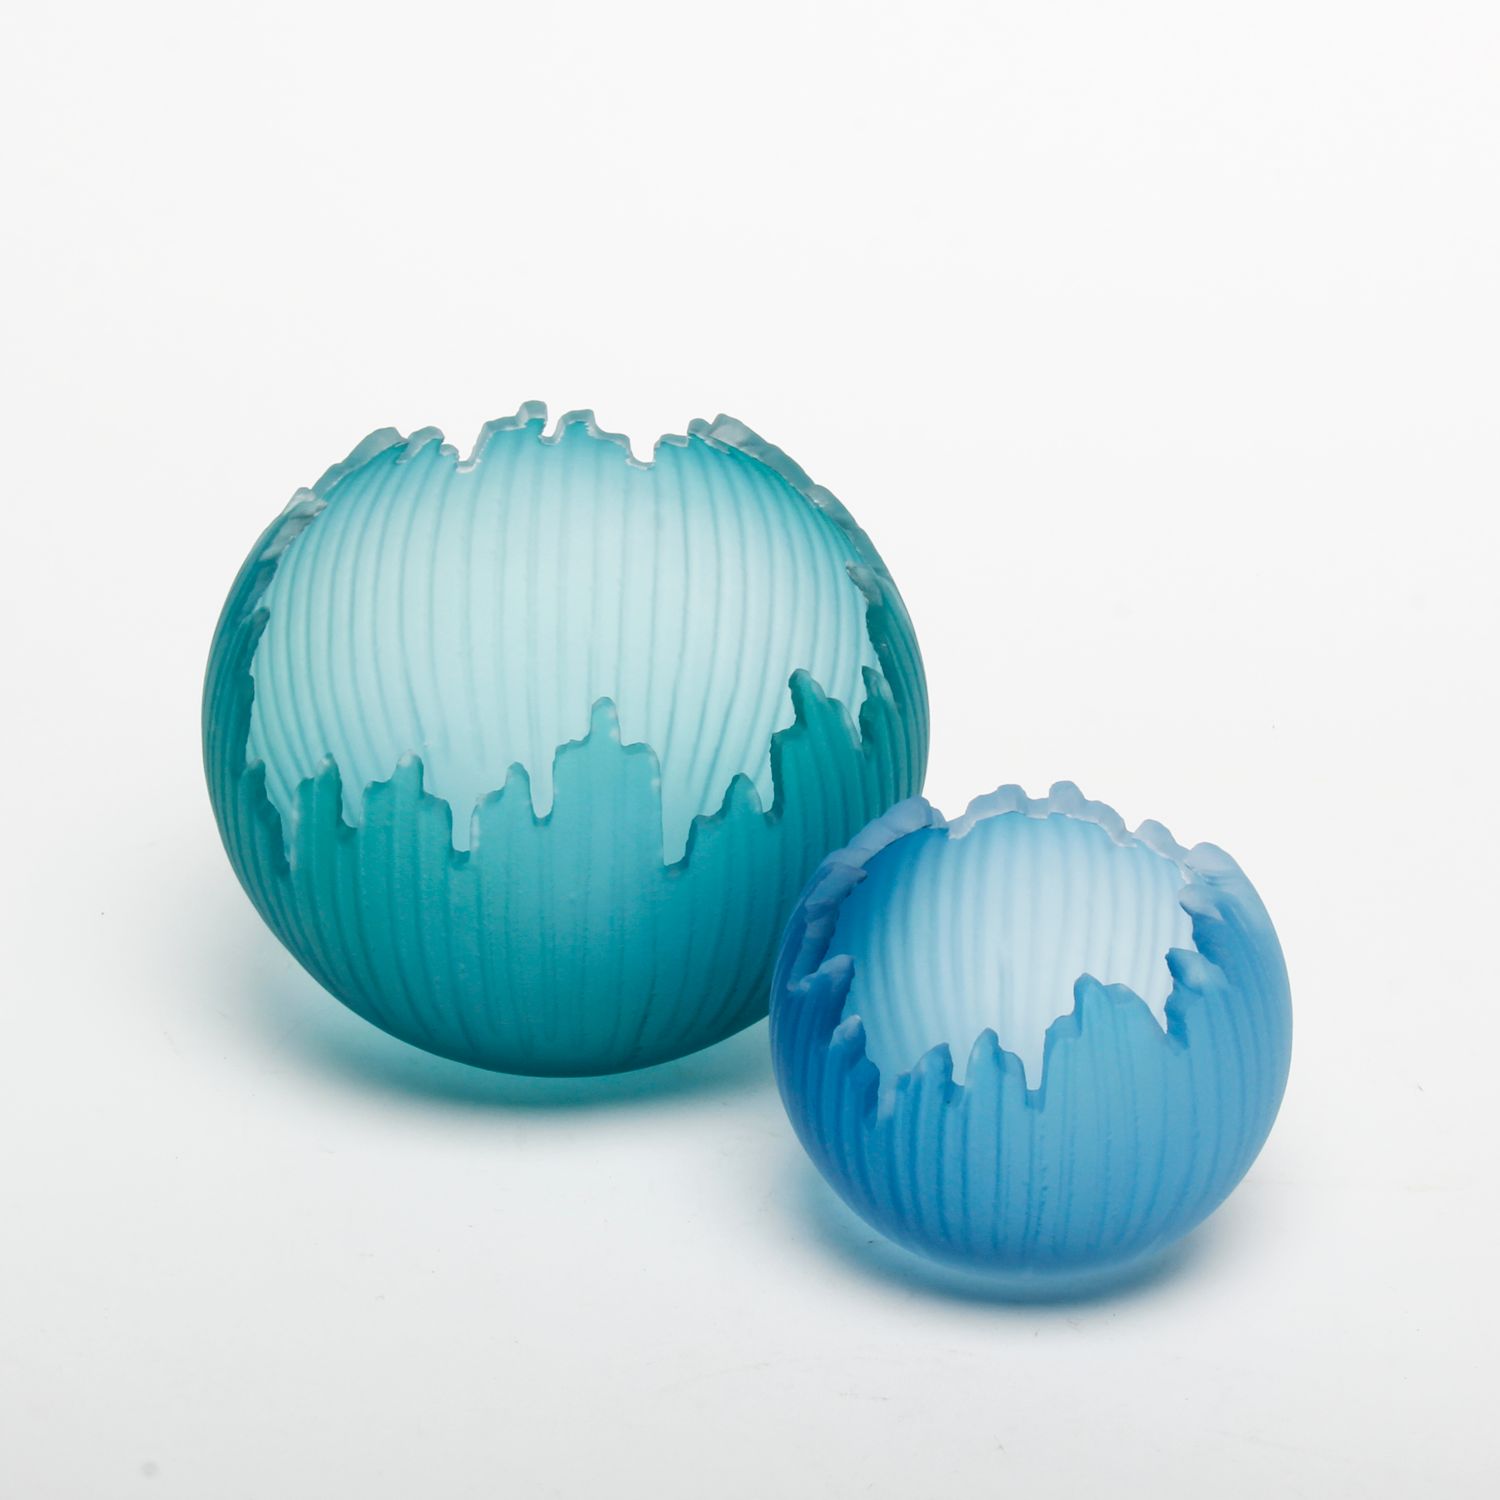 Courtney Downman: Lagoon Green Saw Carved Orb Product Image 2 of 3